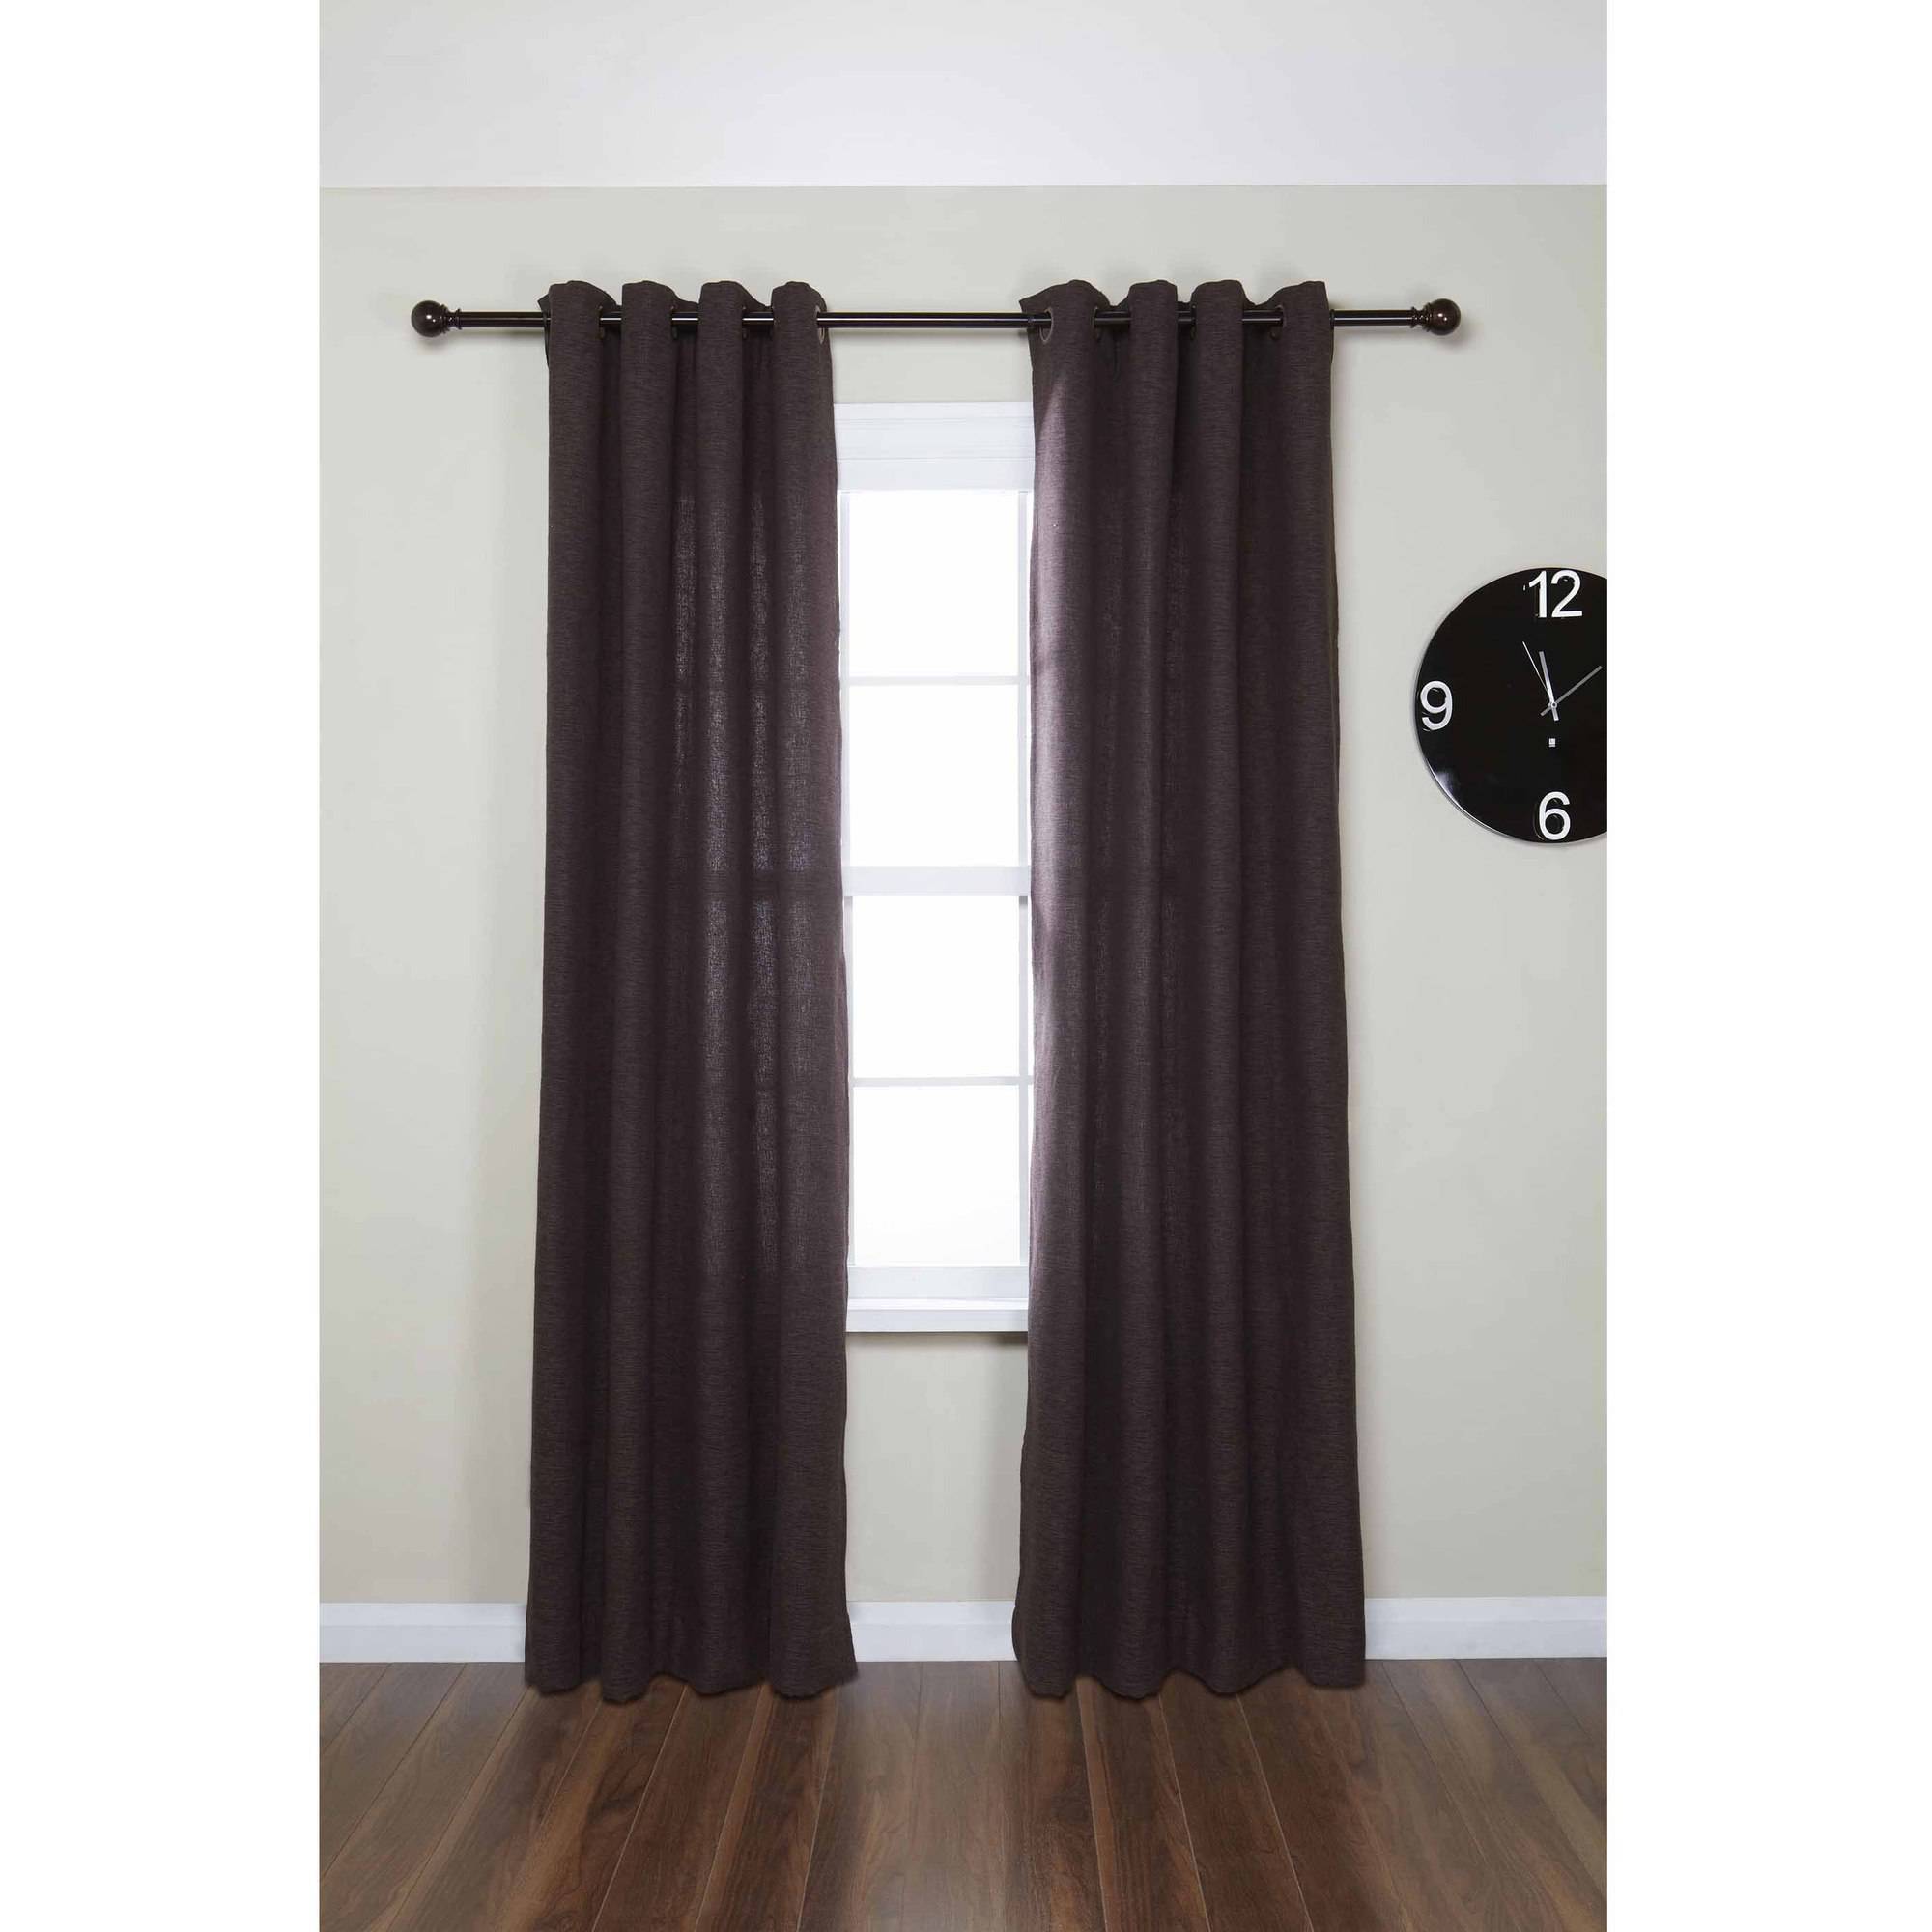 Better Homes & Gardens 1" Oil Rubbed Bronze Single Curtain Rod, 36-66", Bronze - image 2 of 3